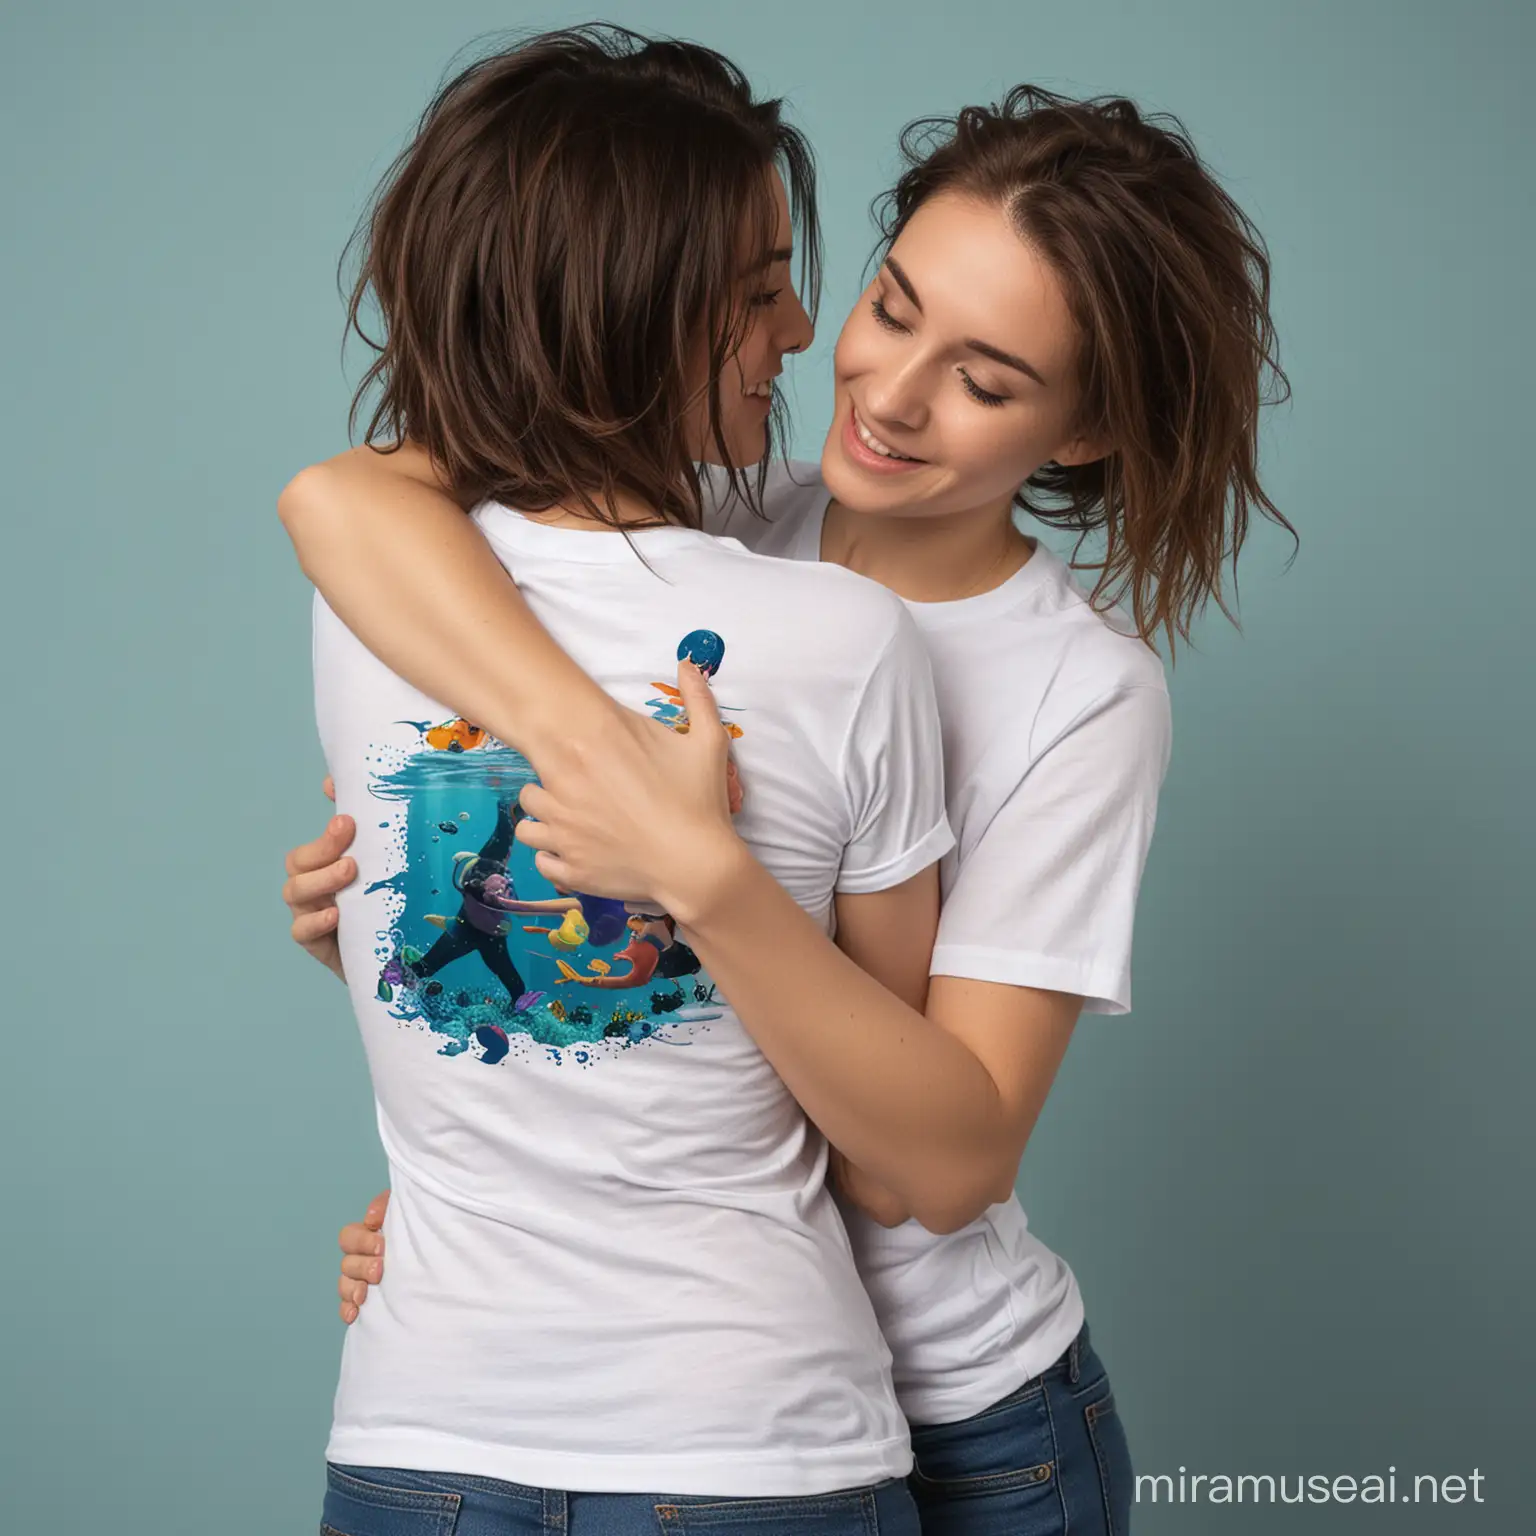 Affectionate Lesbian Couple Embracing Underwater with ShortSleeved Tshirts 21YearOld Woman Giving Back Hug